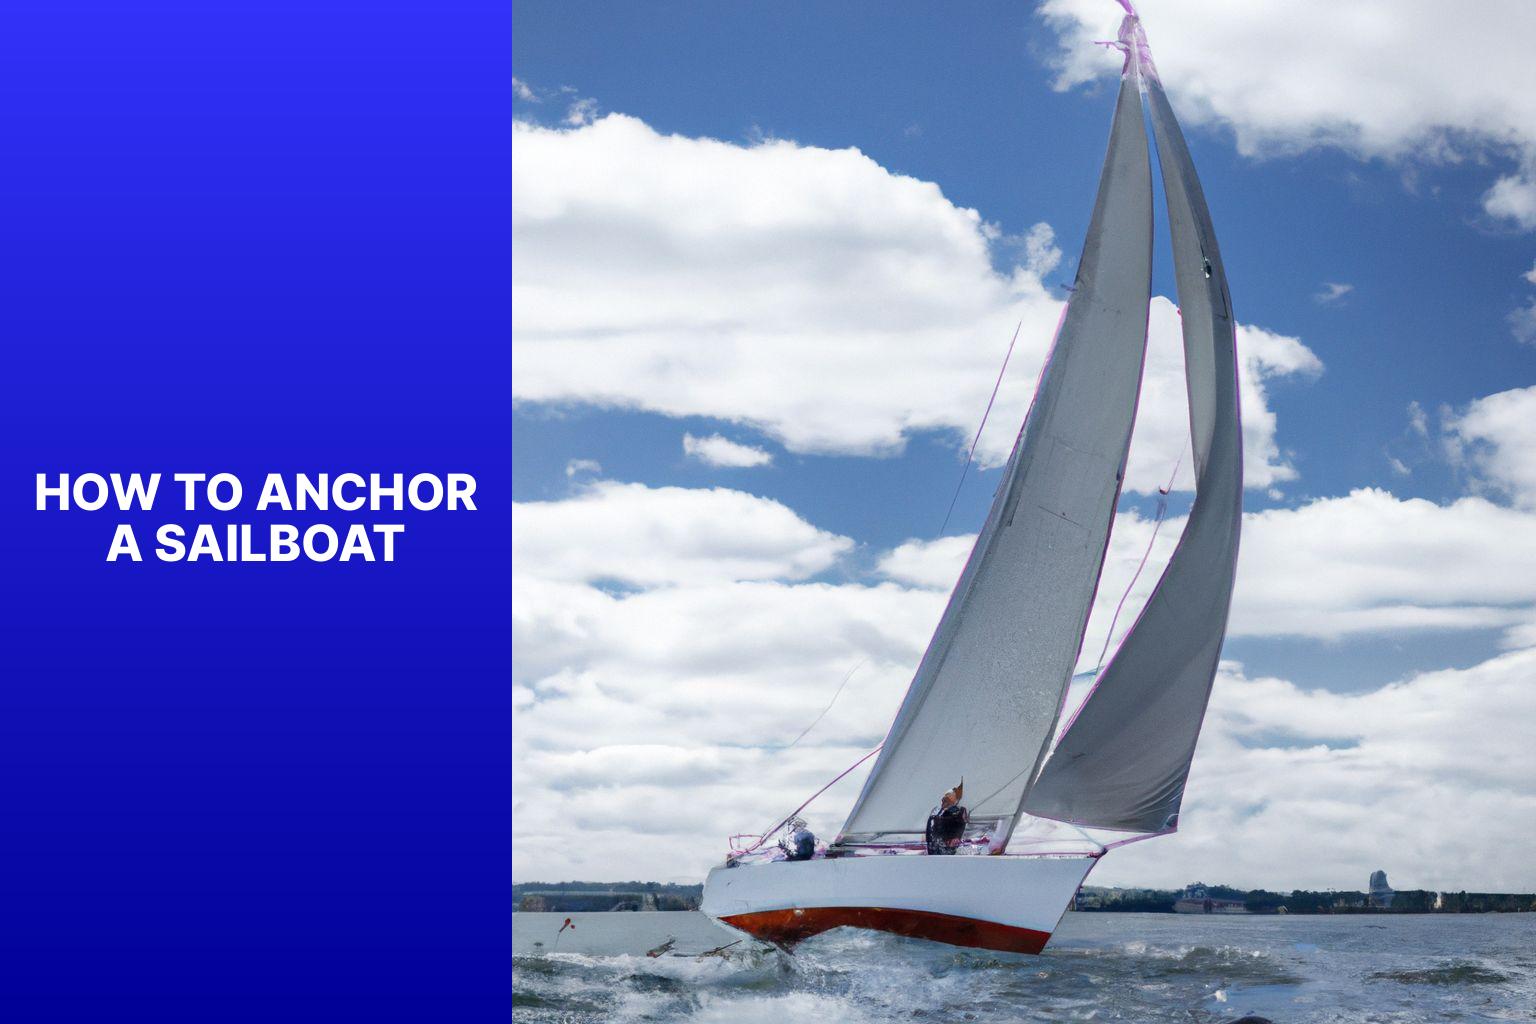 Learn how to anchor a sailboat with our step-by-step guide